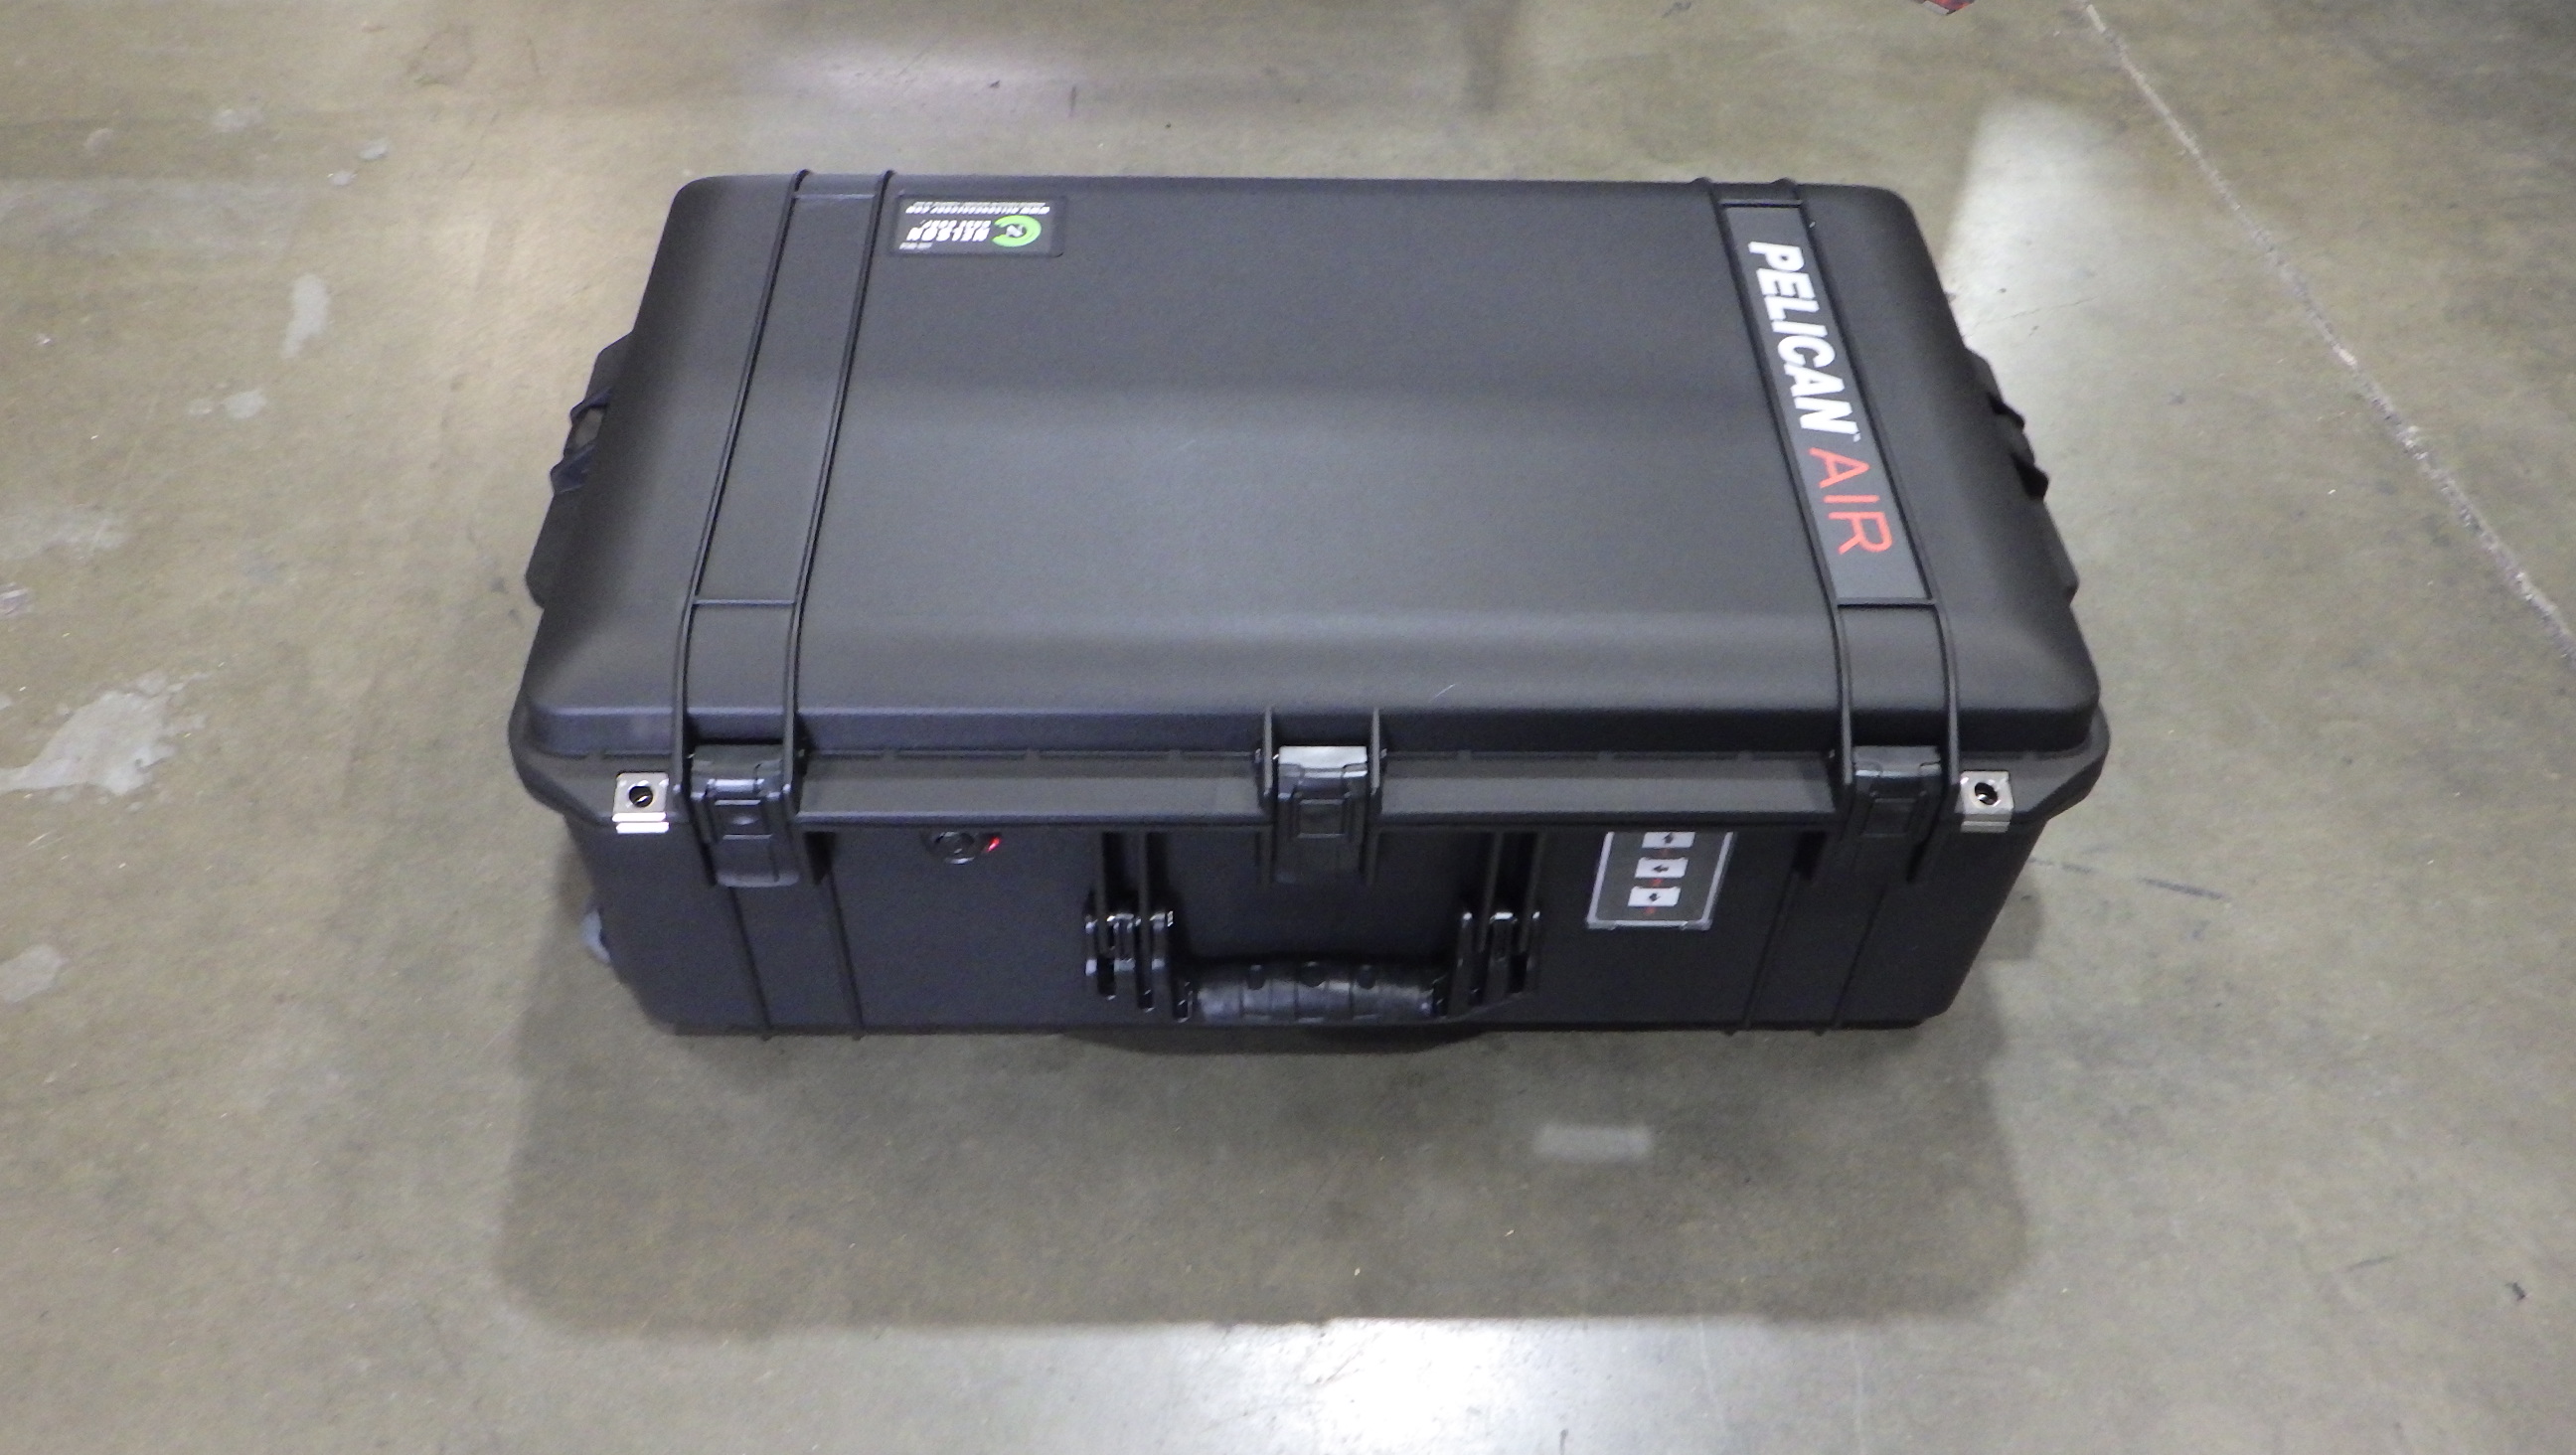 Print # 9659 - Retrofit Existing Pelican 1595 Air with Multiple Foam Insert Layers By Nelson Case Corp